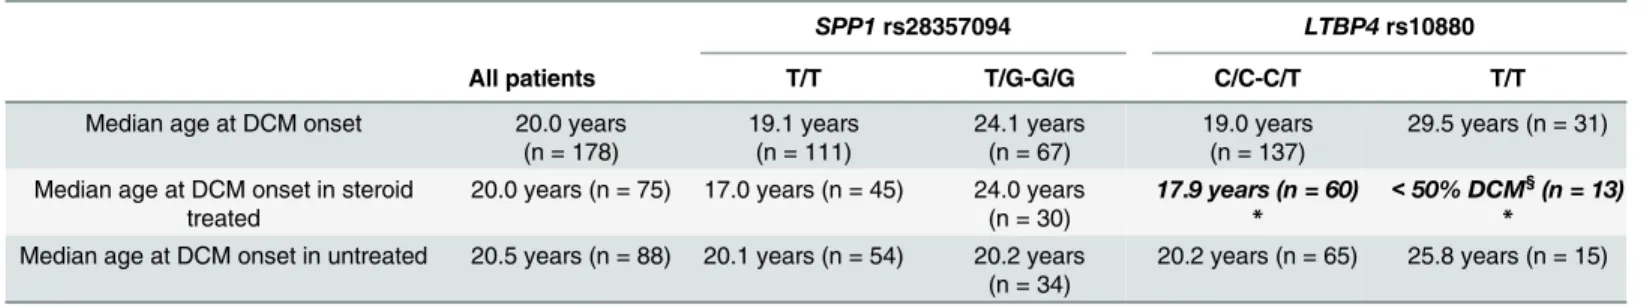 Table 1. Median age at DCM onset by SPP1 and LTBP4 genotype.